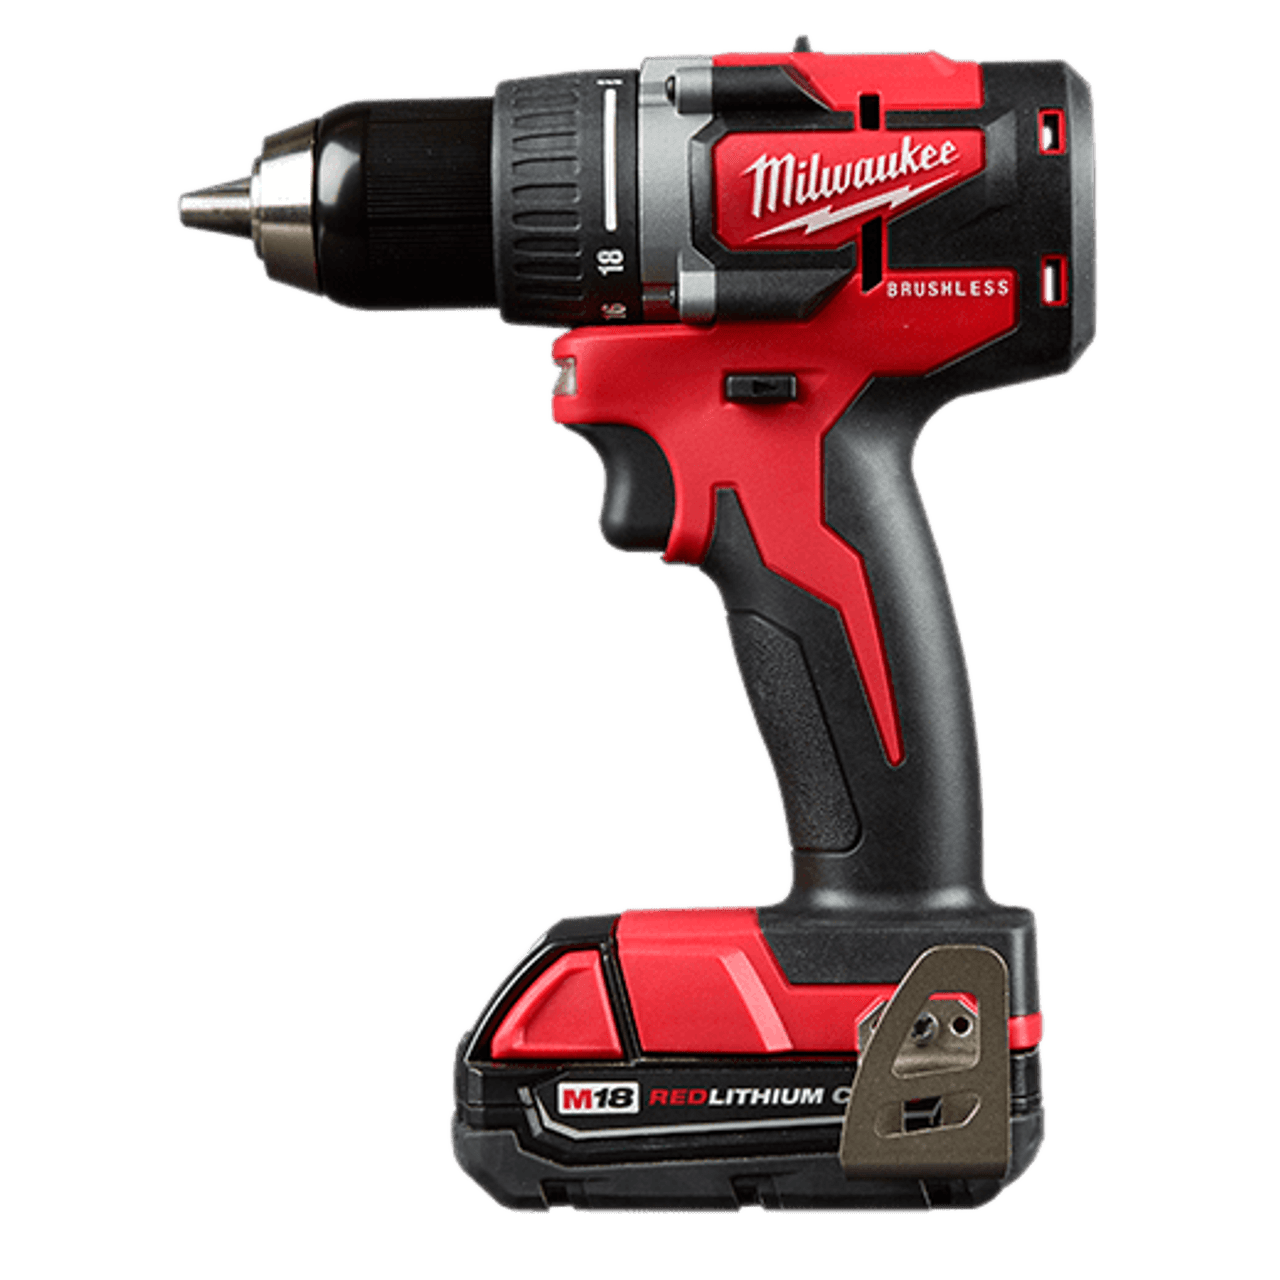 M18 Compact Brushless 2-Tool Combo Kit, Drill Driver/Impact Driver